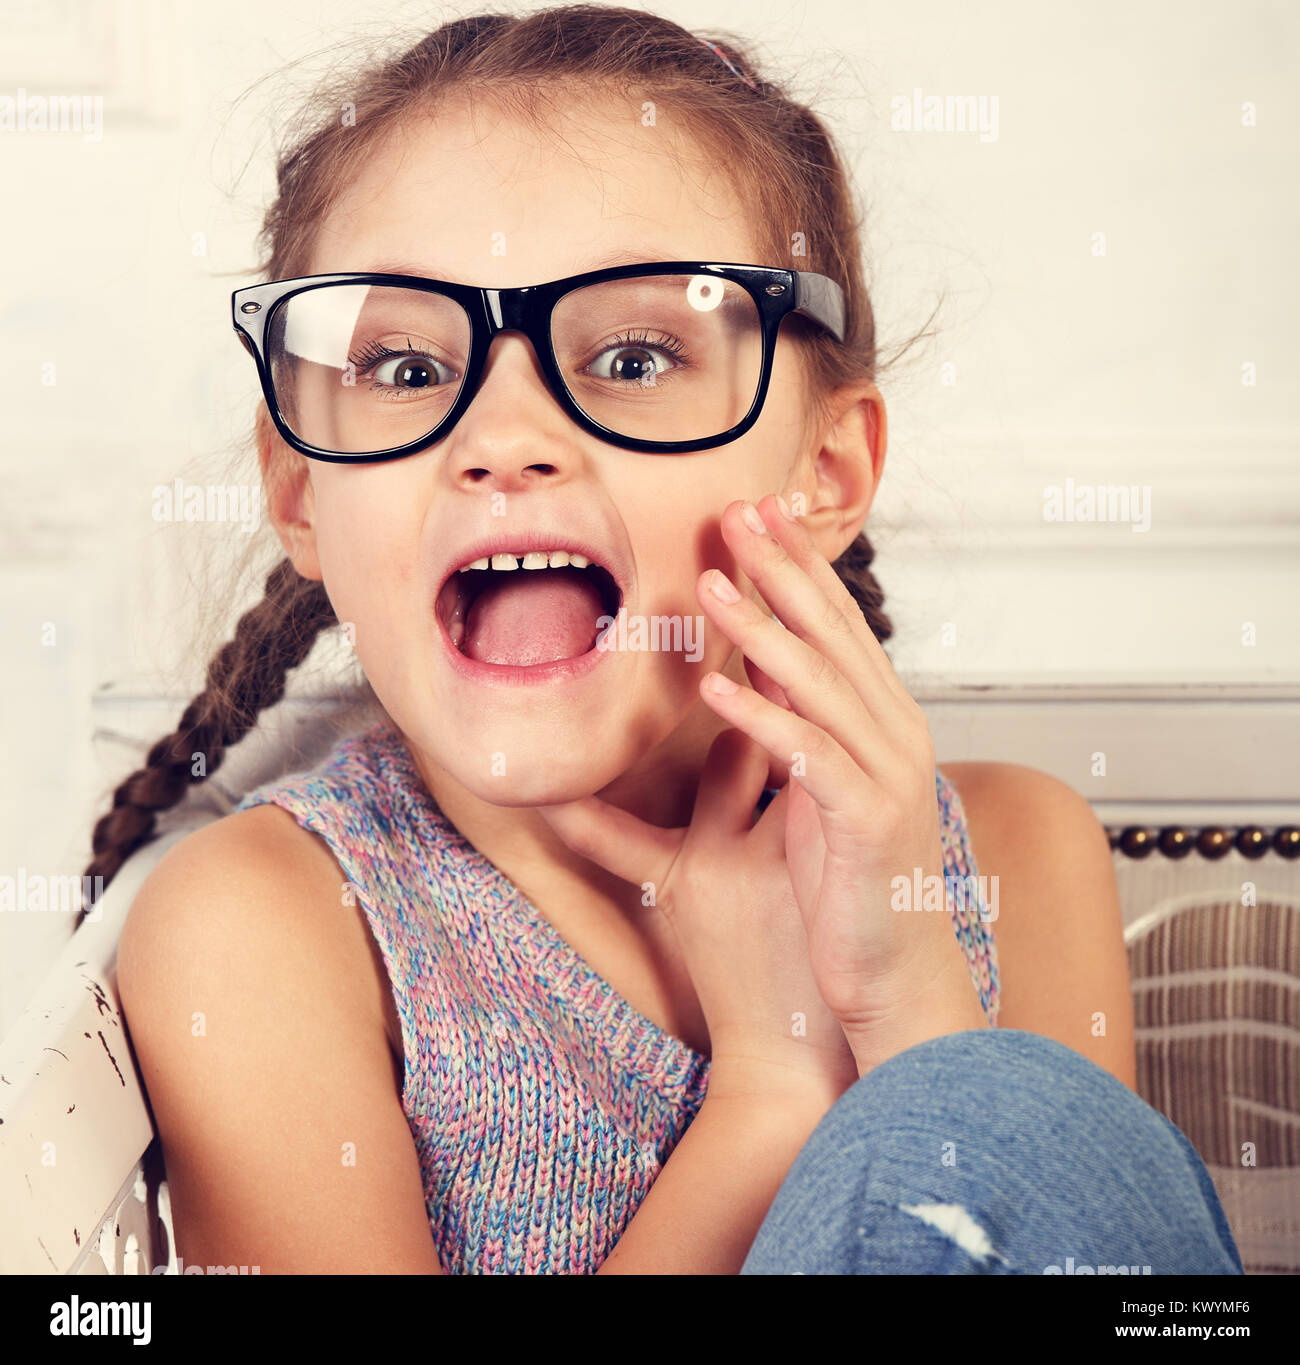 Happy excited surprising kid girl in fashion eyeglasses looking with open mouth. Closeup toned vintage portrait Stock Photo